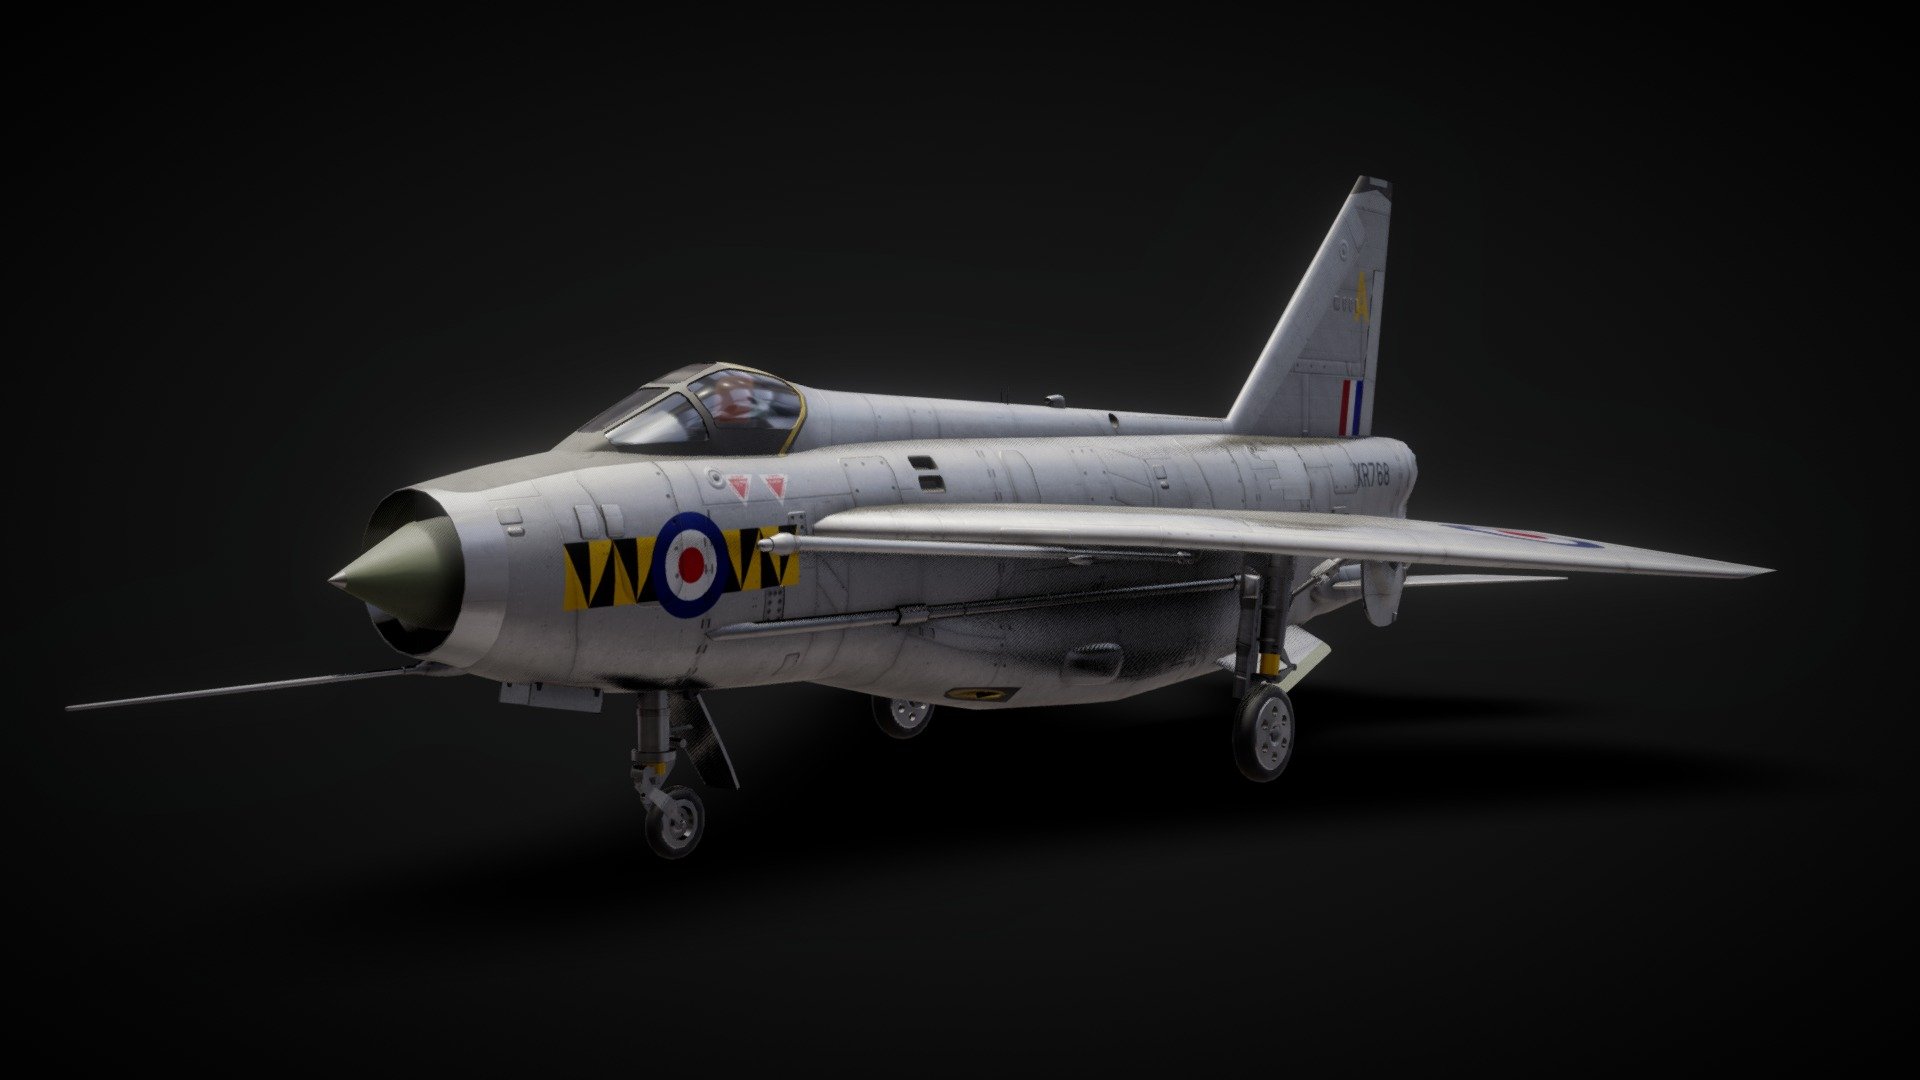 An asset I made for the Roblox game Wings of Glory (https://www.roblox.com/games/338574920/Wings-of-Glory)

Took about 14 hours on the model and another 4 on the plating textures I used to texture the aircraft.

Created in Blender and Affinity Photo

Find me on artstation! (https://www.artstation.com/parallelmayhem) - English Electric Lightning F.6 - 3D model by Sam Morse-Brown (@ParallelMayhem) 3d model